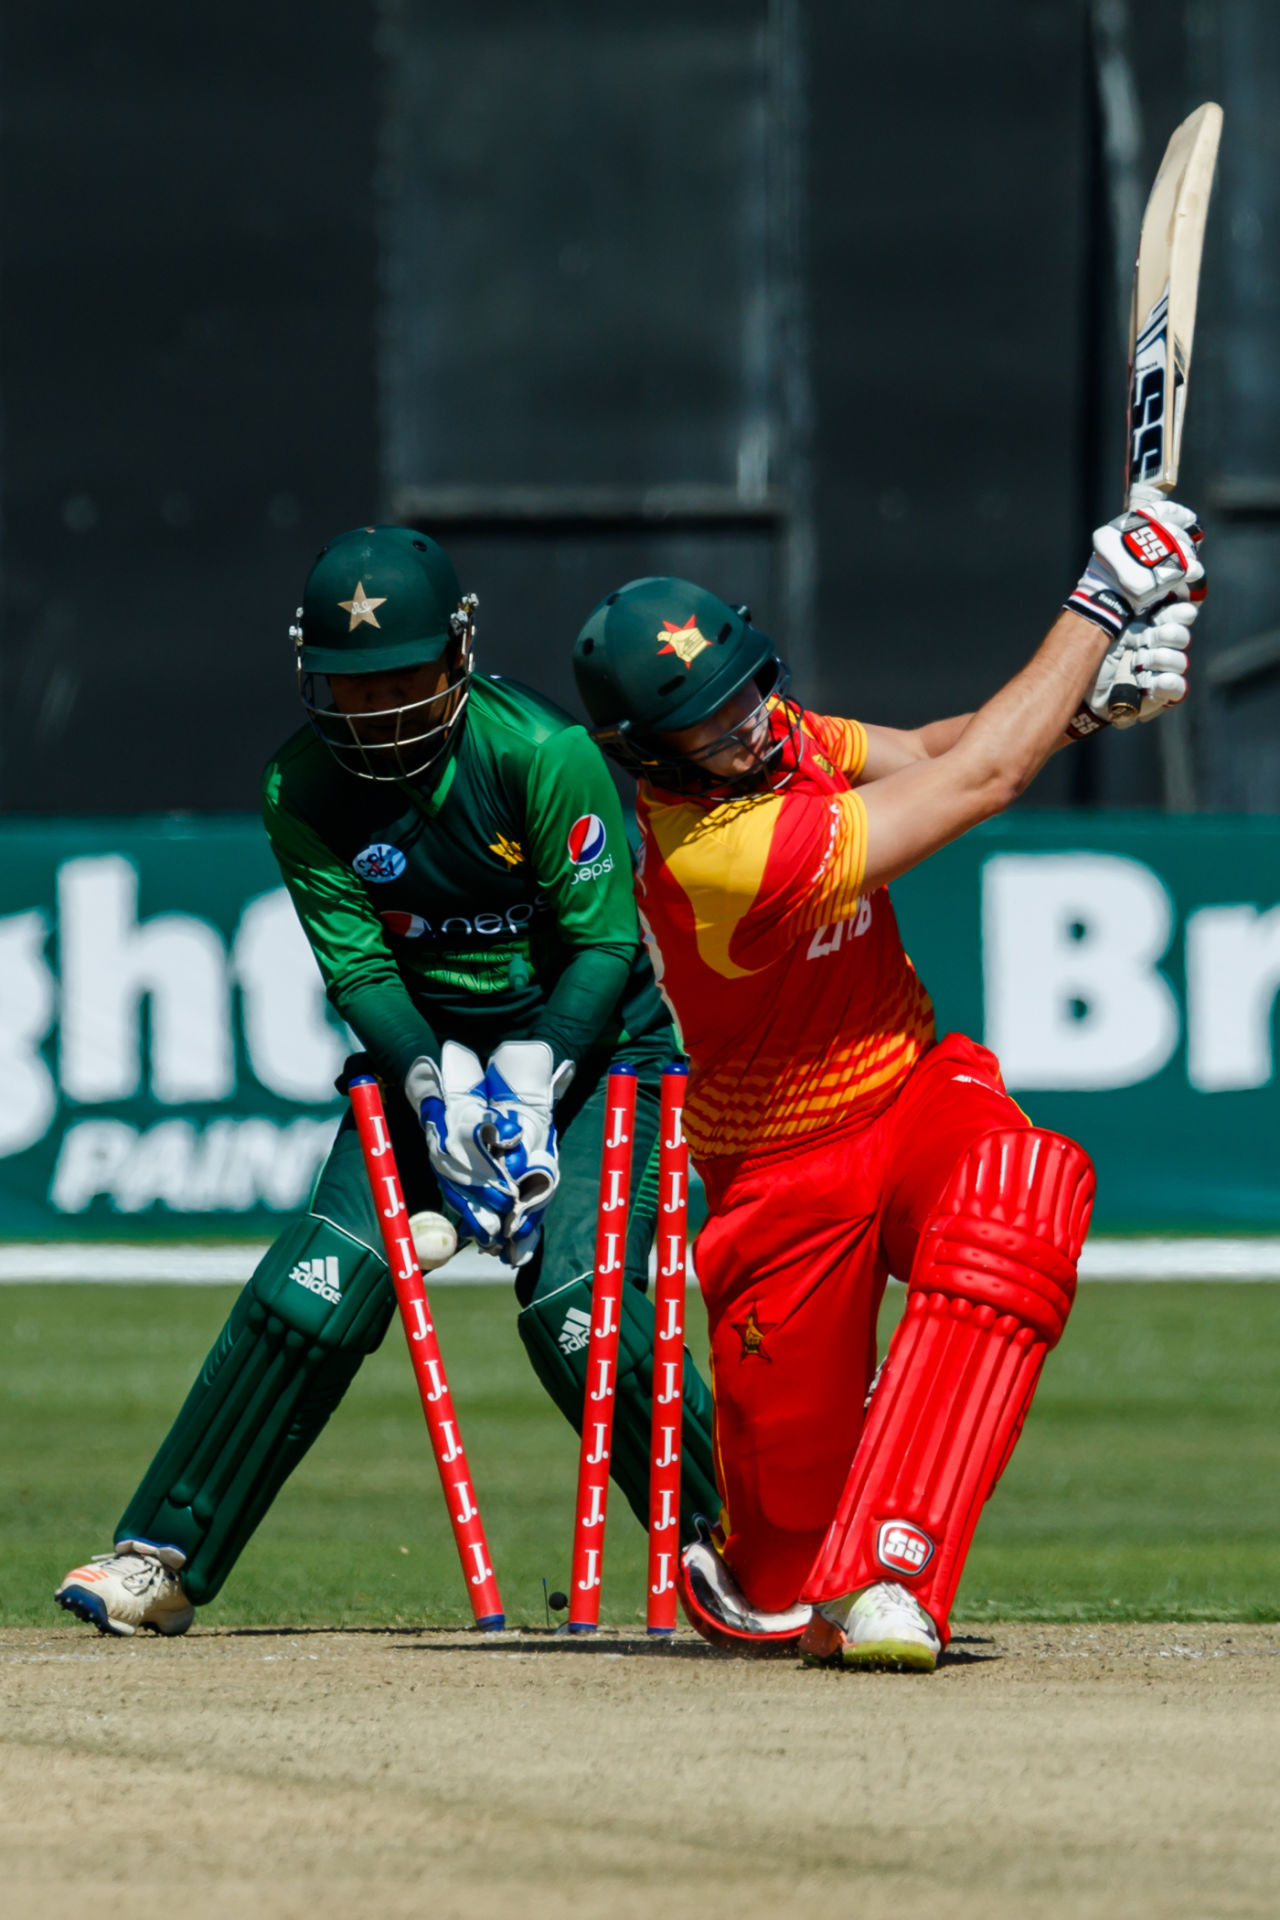 Peter Moor has his stumps shattered, Zimbabwe v Pakistan, T20I tri-series, 1st T20I, Harare, July 1, 2018